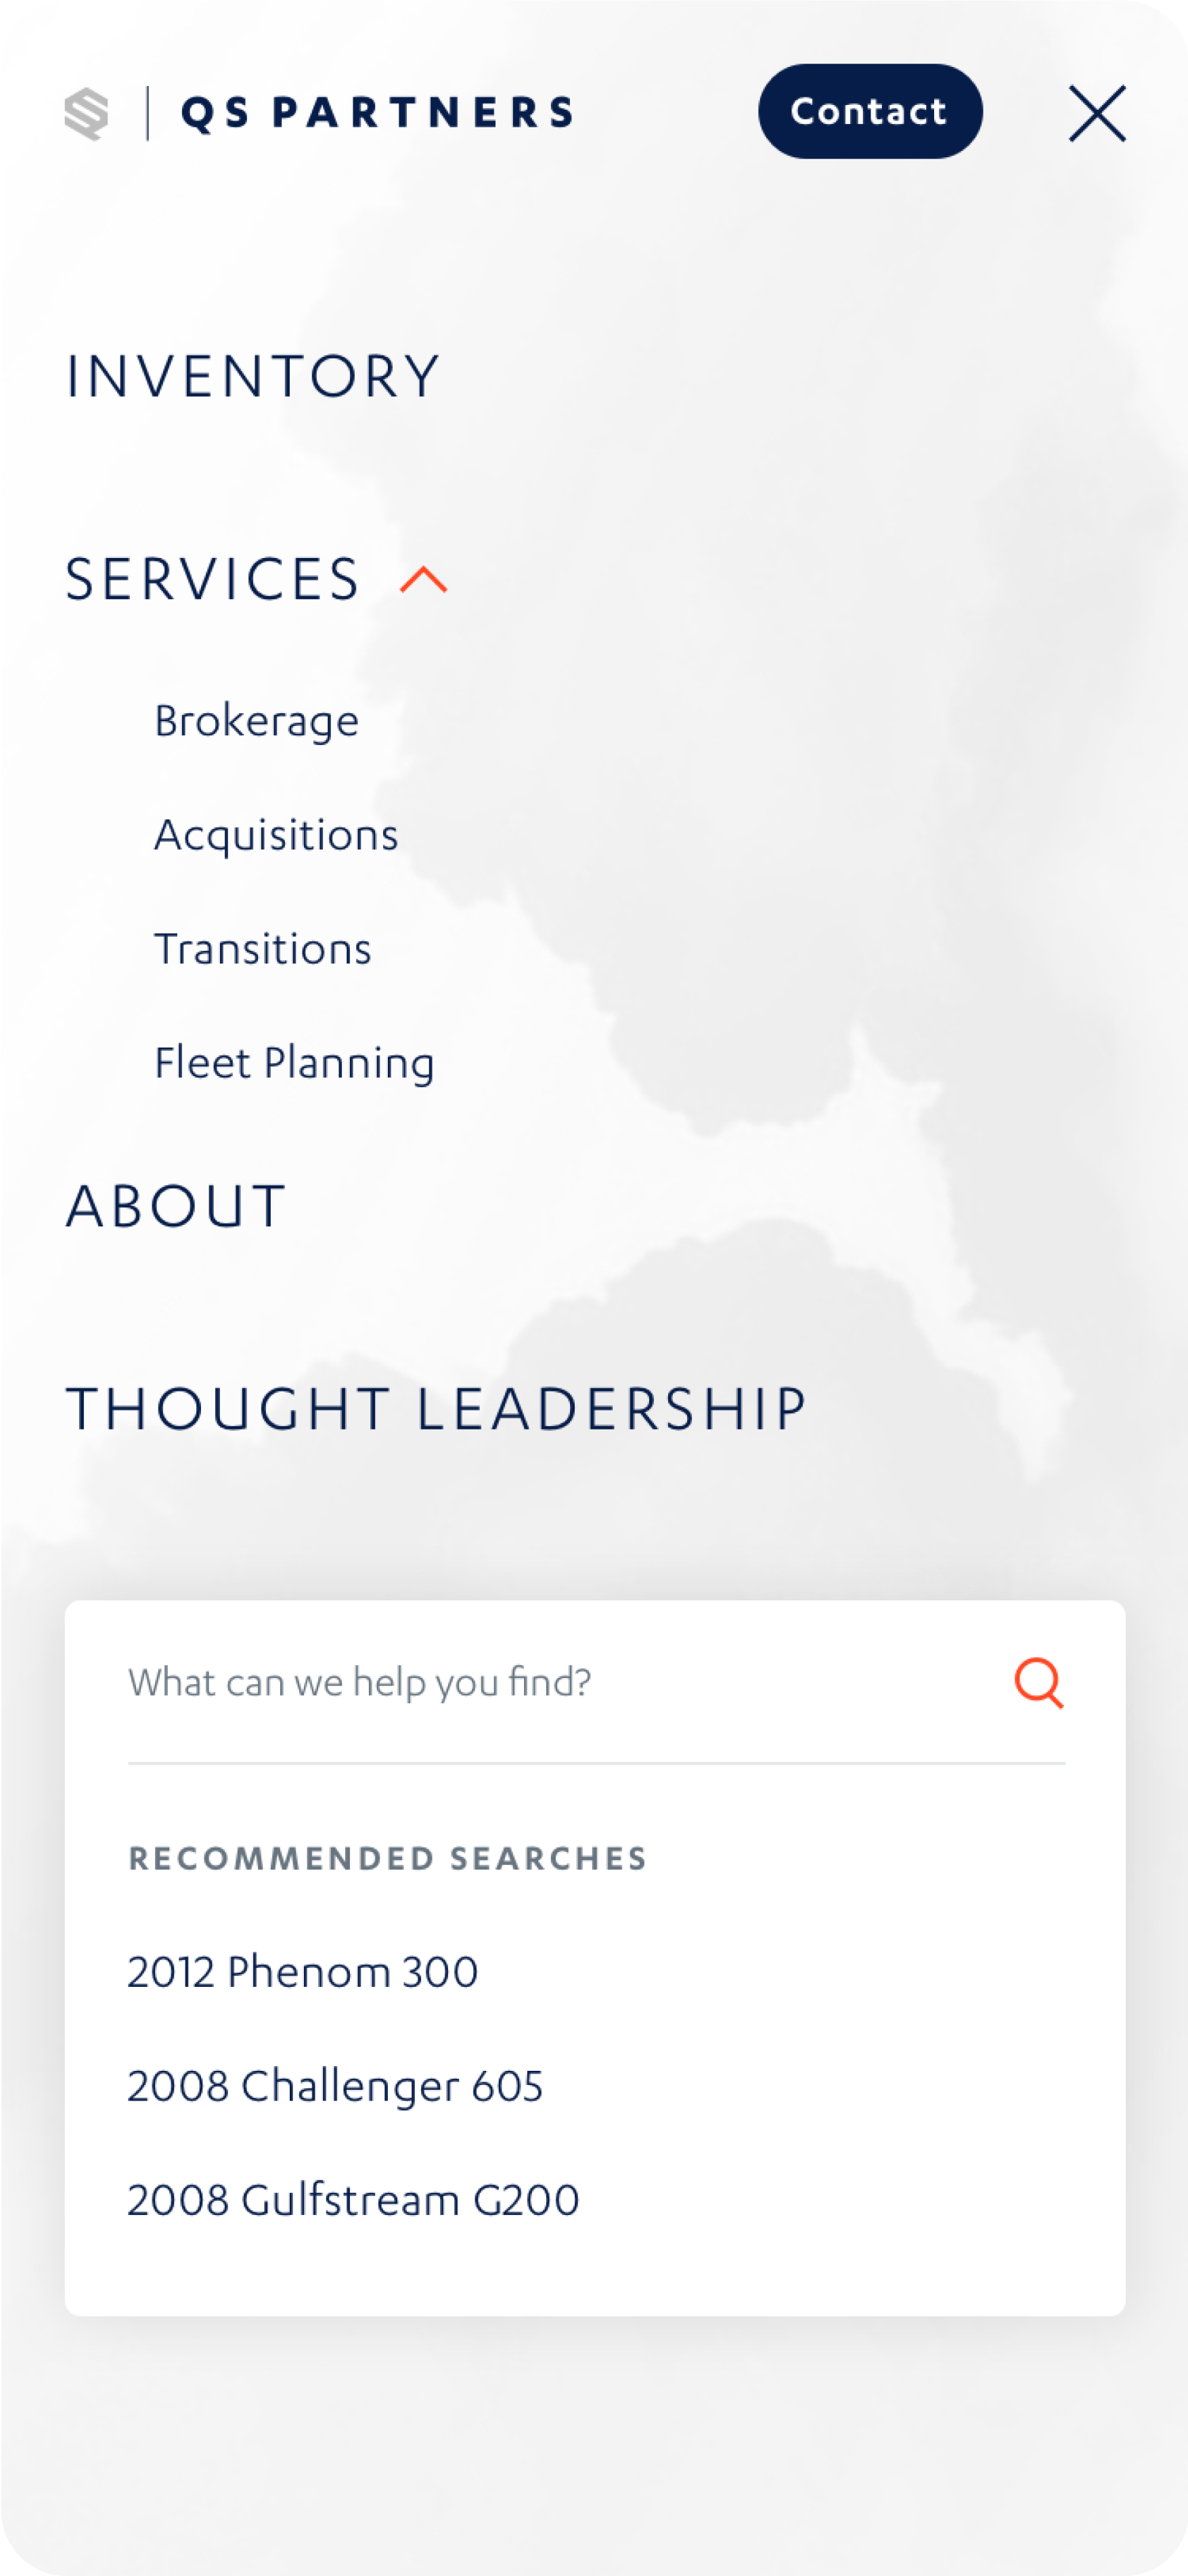 site navigation featuring Inventory, Services, About and Thought Leadership